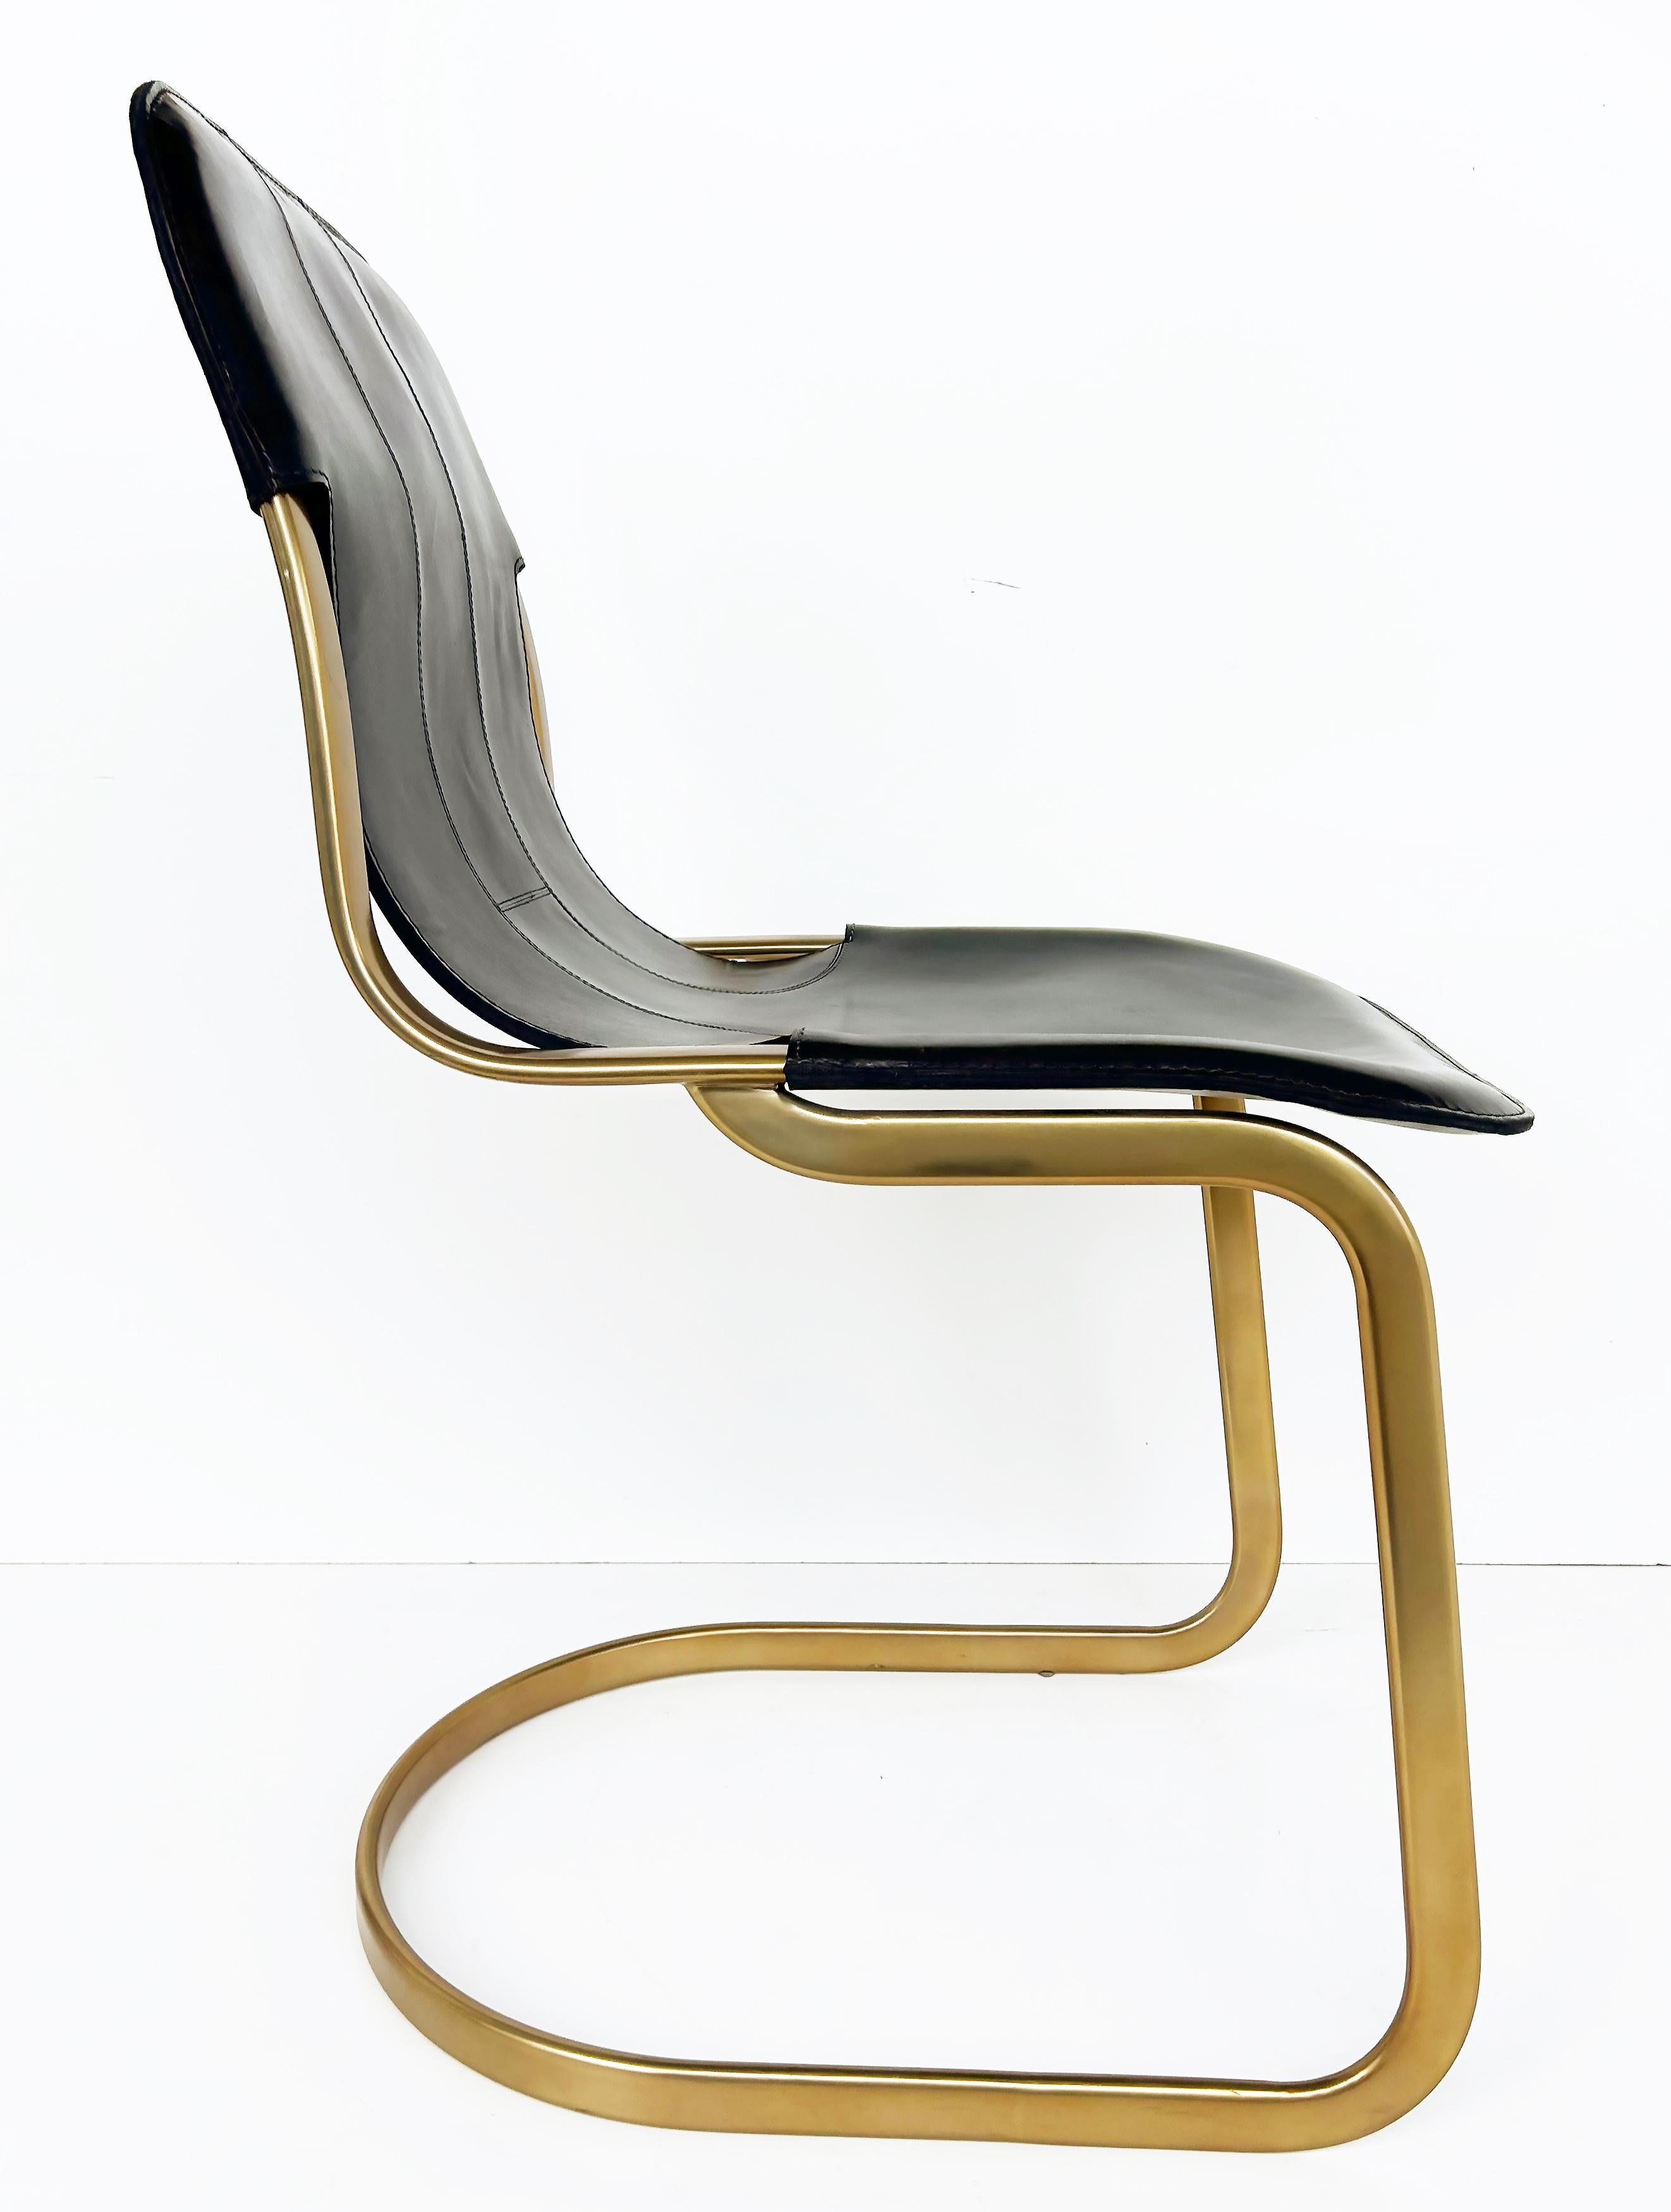 Brass Plated Leather Cantilevered Dining Chairs After Willy Rizzo Desgn In Good Condition For Sale In Miami, FL